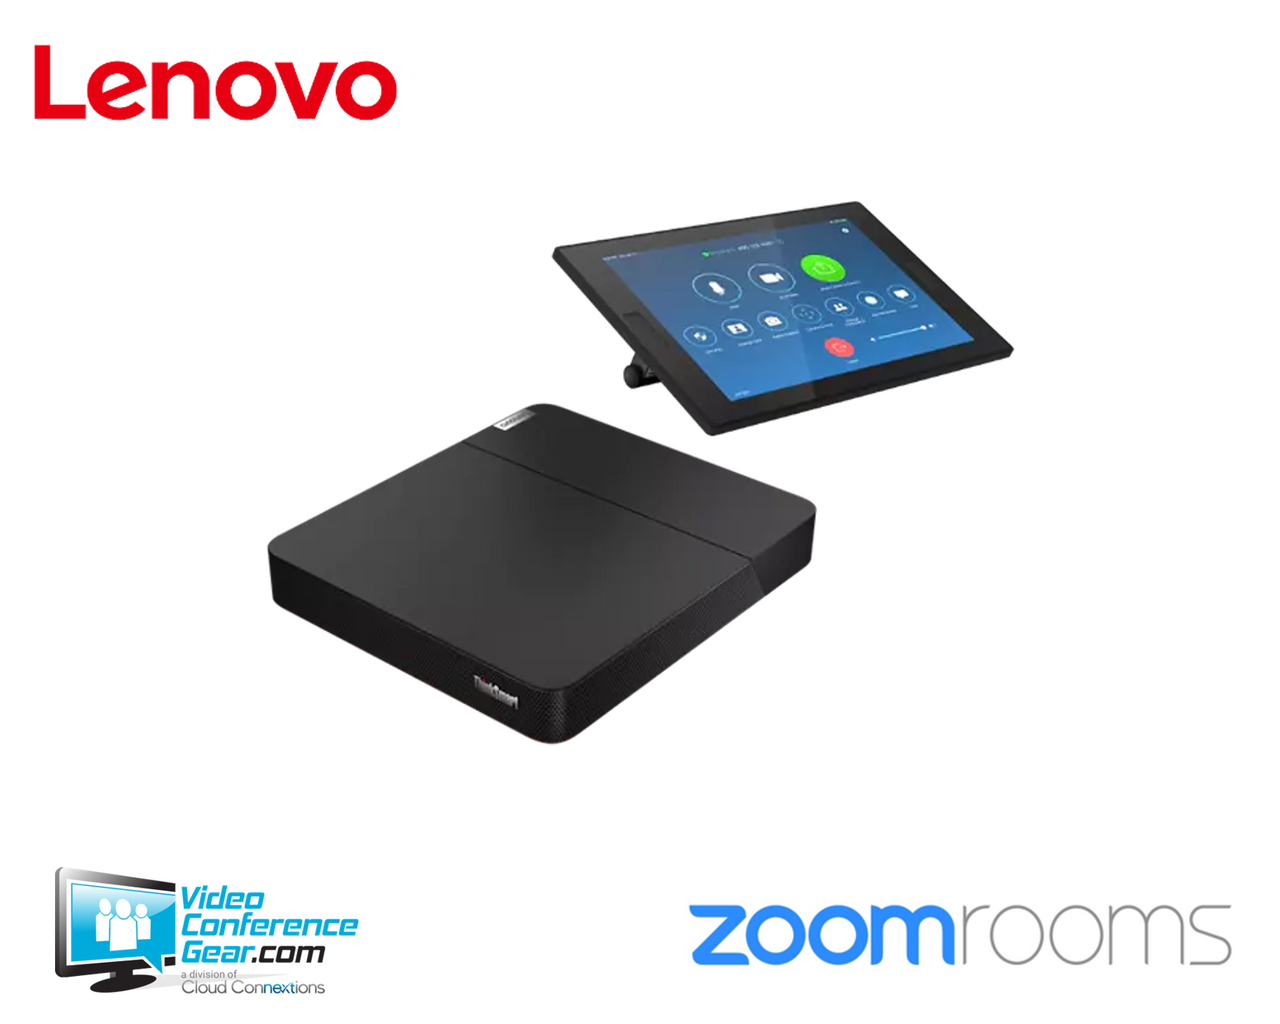 Yamaha ADECIA, Lenovo & Aver large conference room ZOOM solution. ADECIA Wireless Microphones, LEN Thinksmart Core & Controller with Aver CAM520 Pro 2